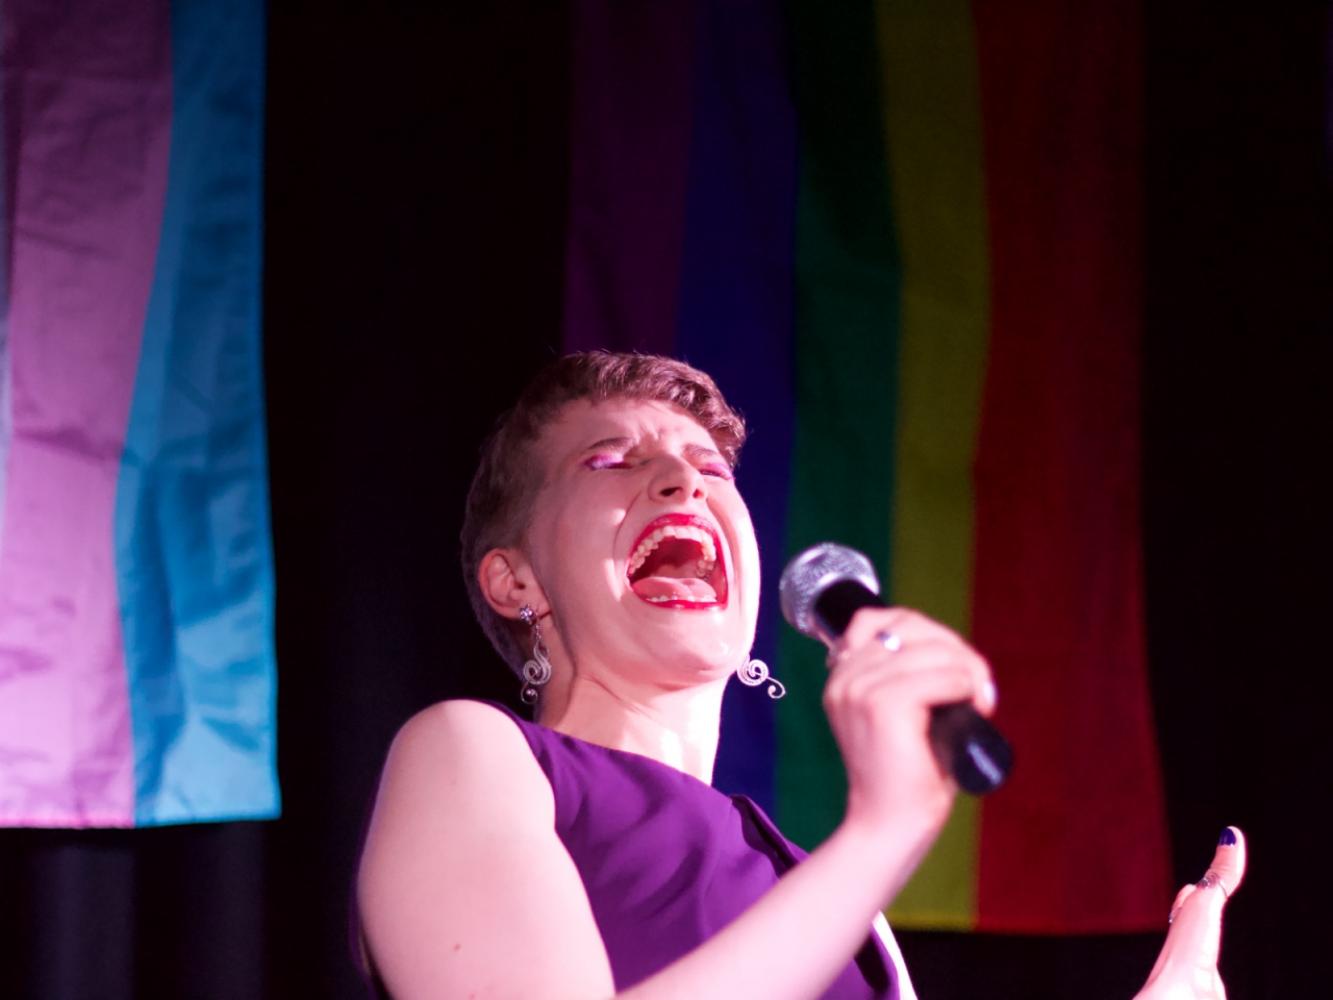 A performer is centre open mouthed singing an impressive note with a mic in their hand.  There are pride flags behind them.